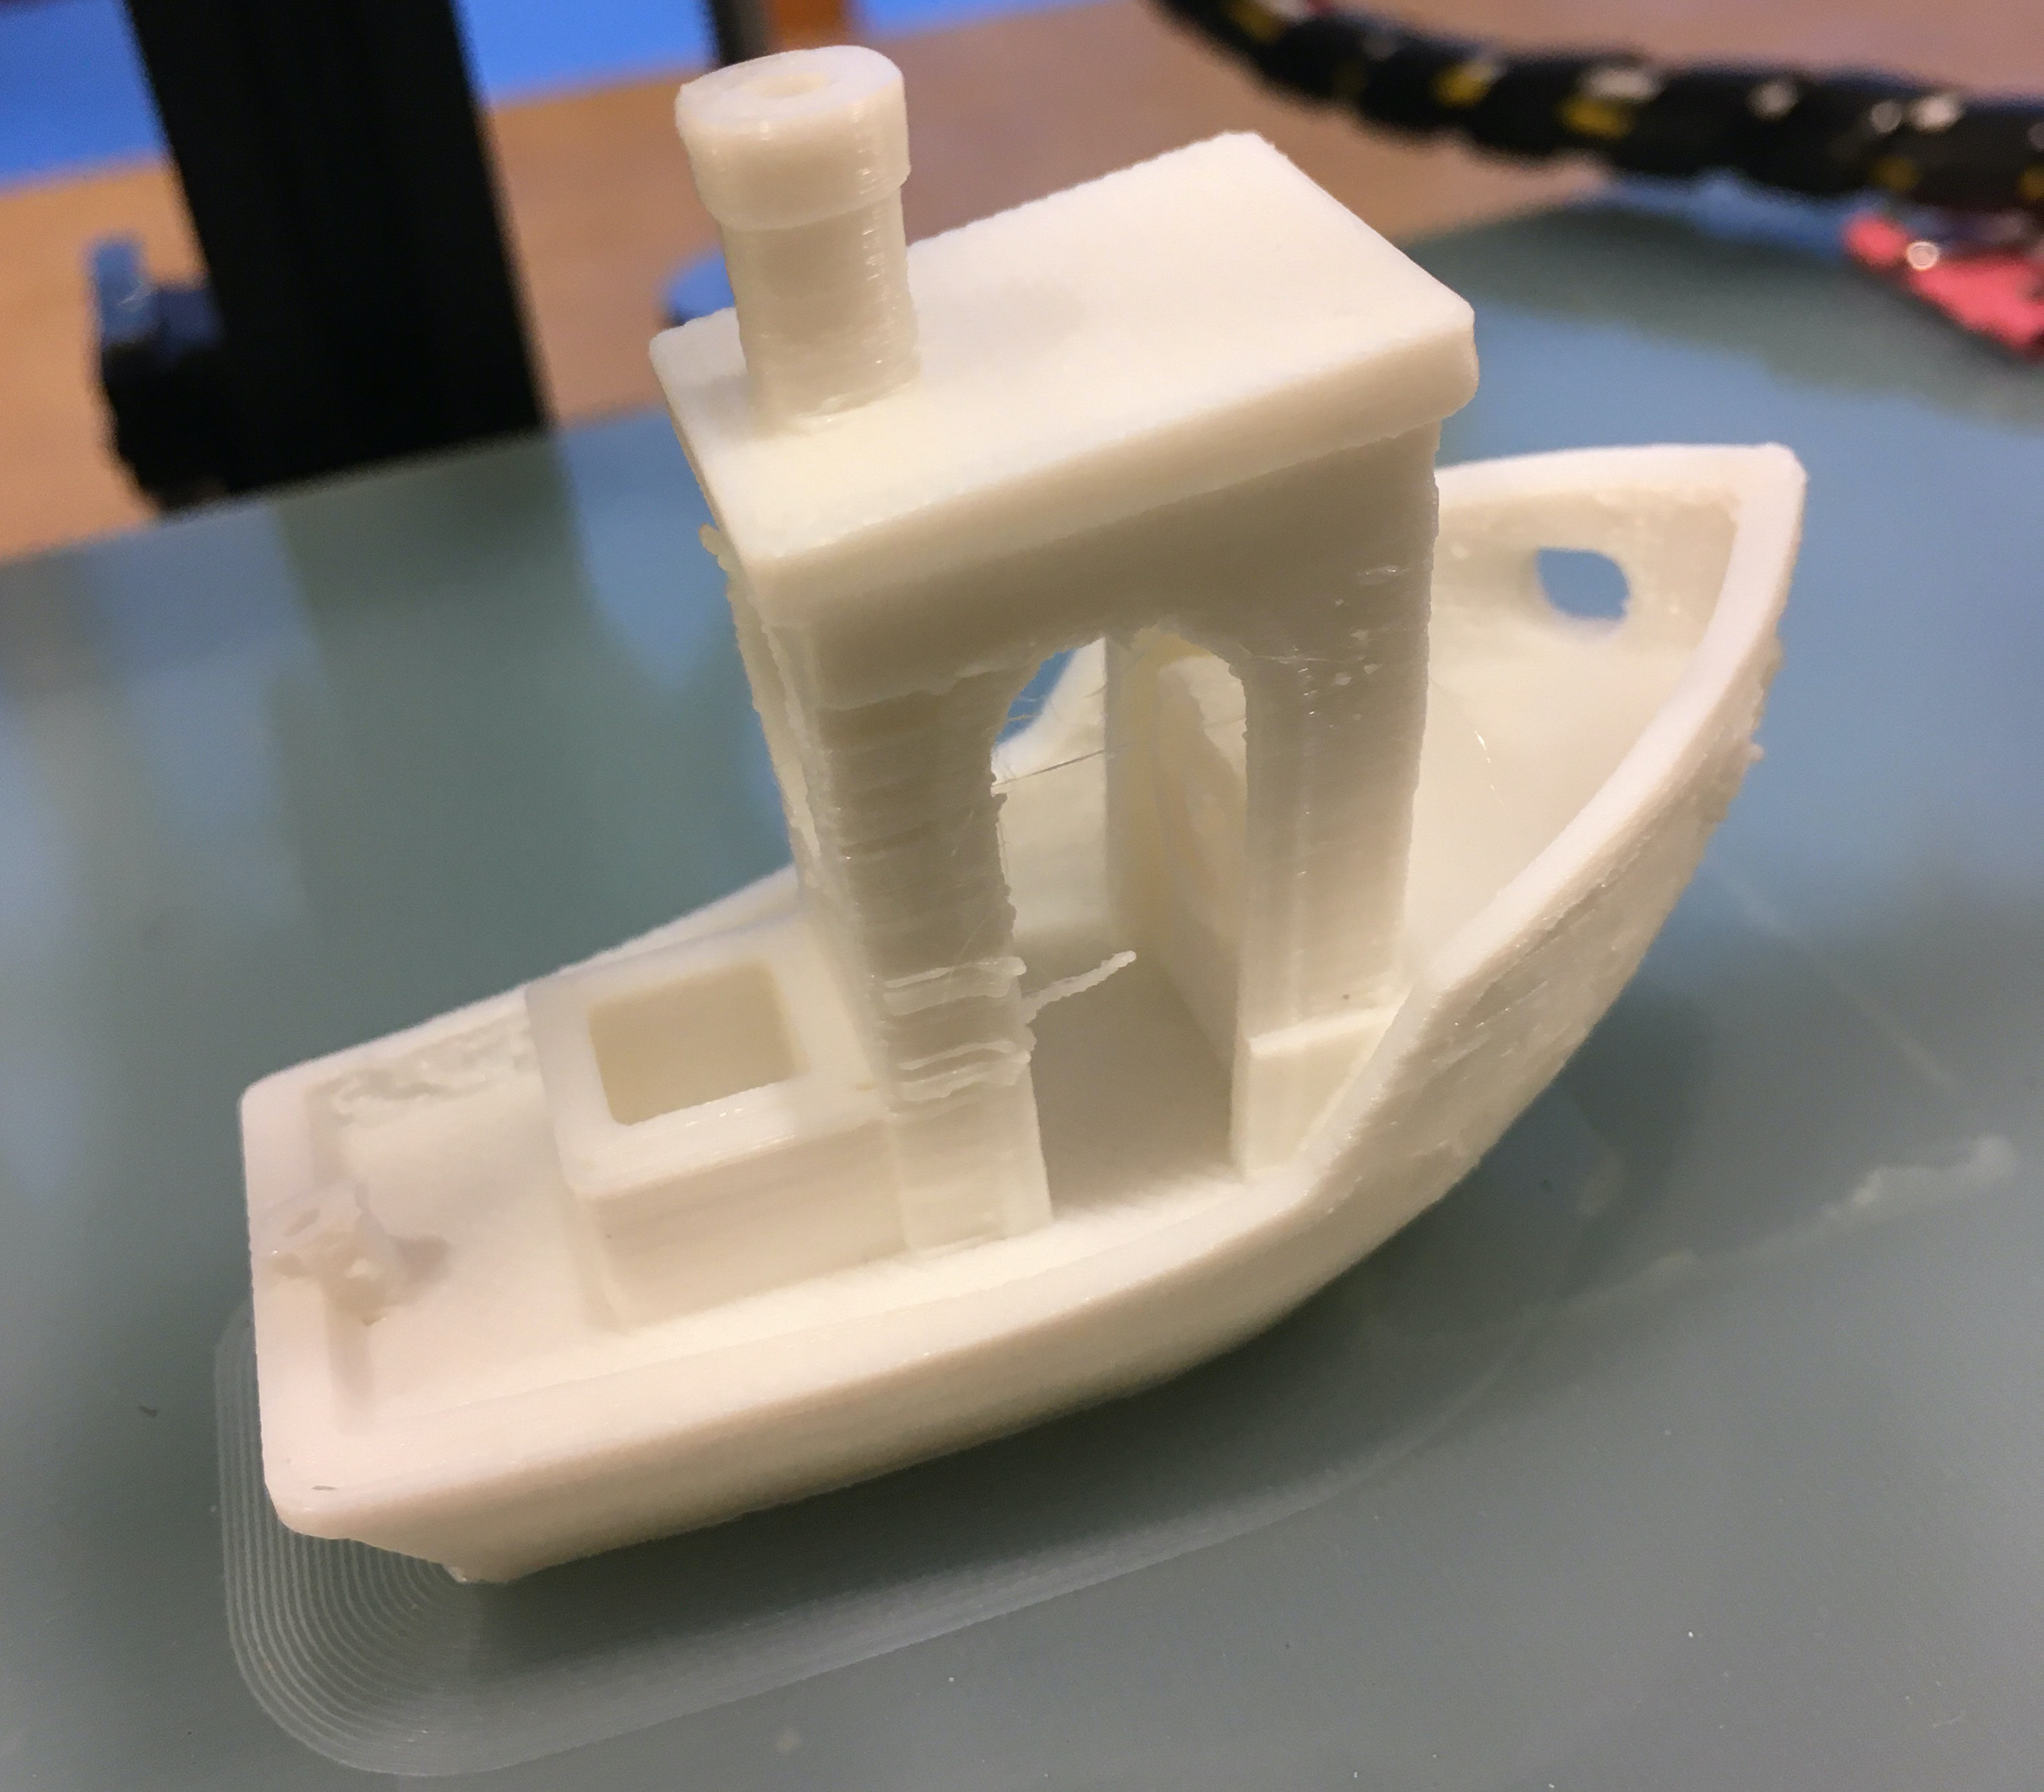 Completed Benchy